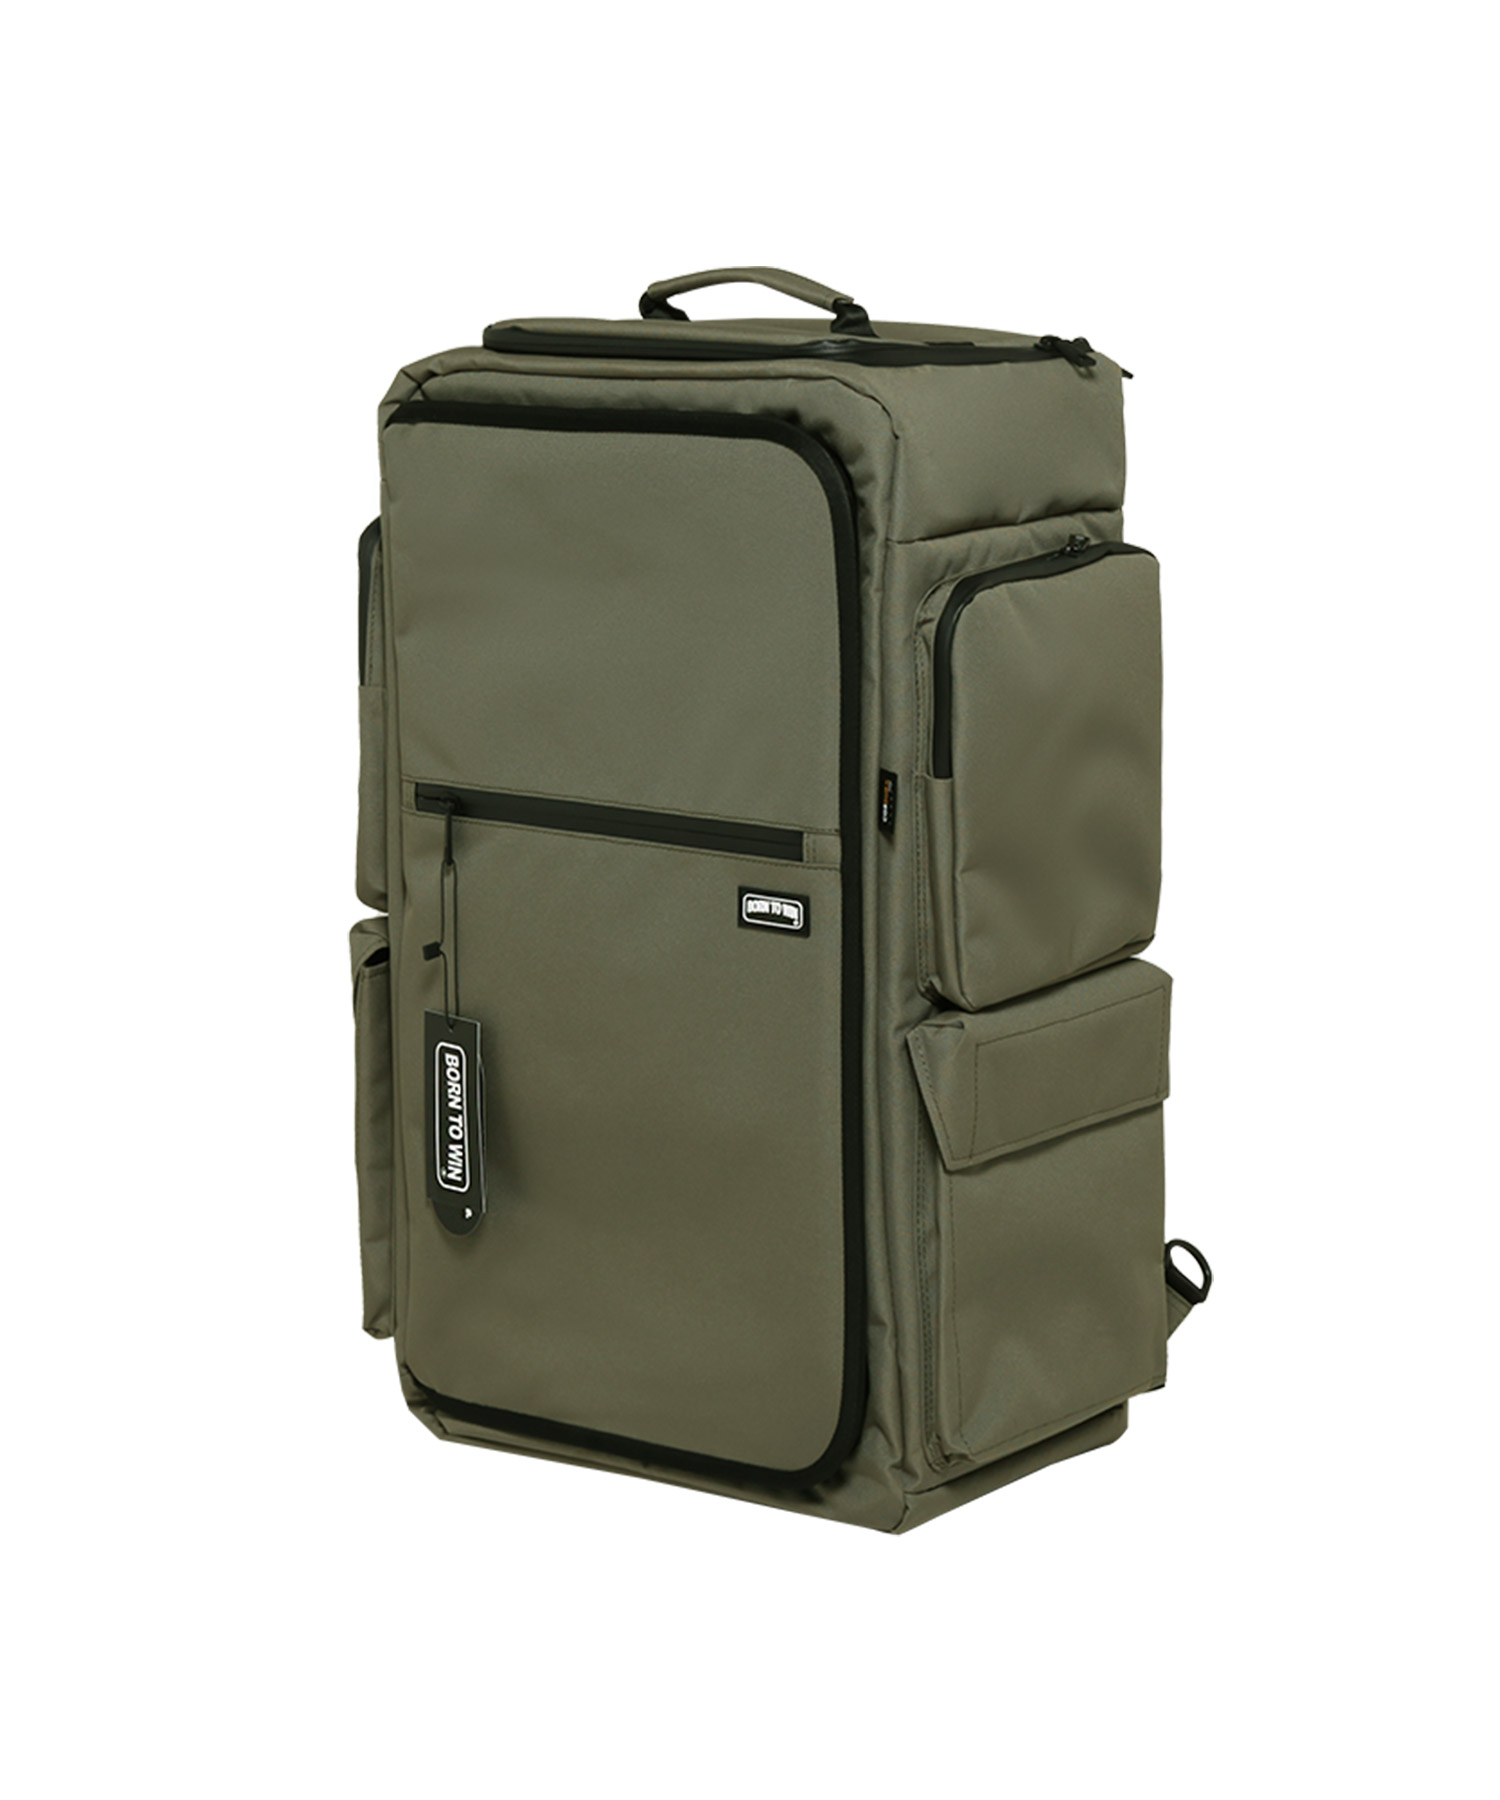 B1 BACKPACK NO PATCH VER [KHAKI]